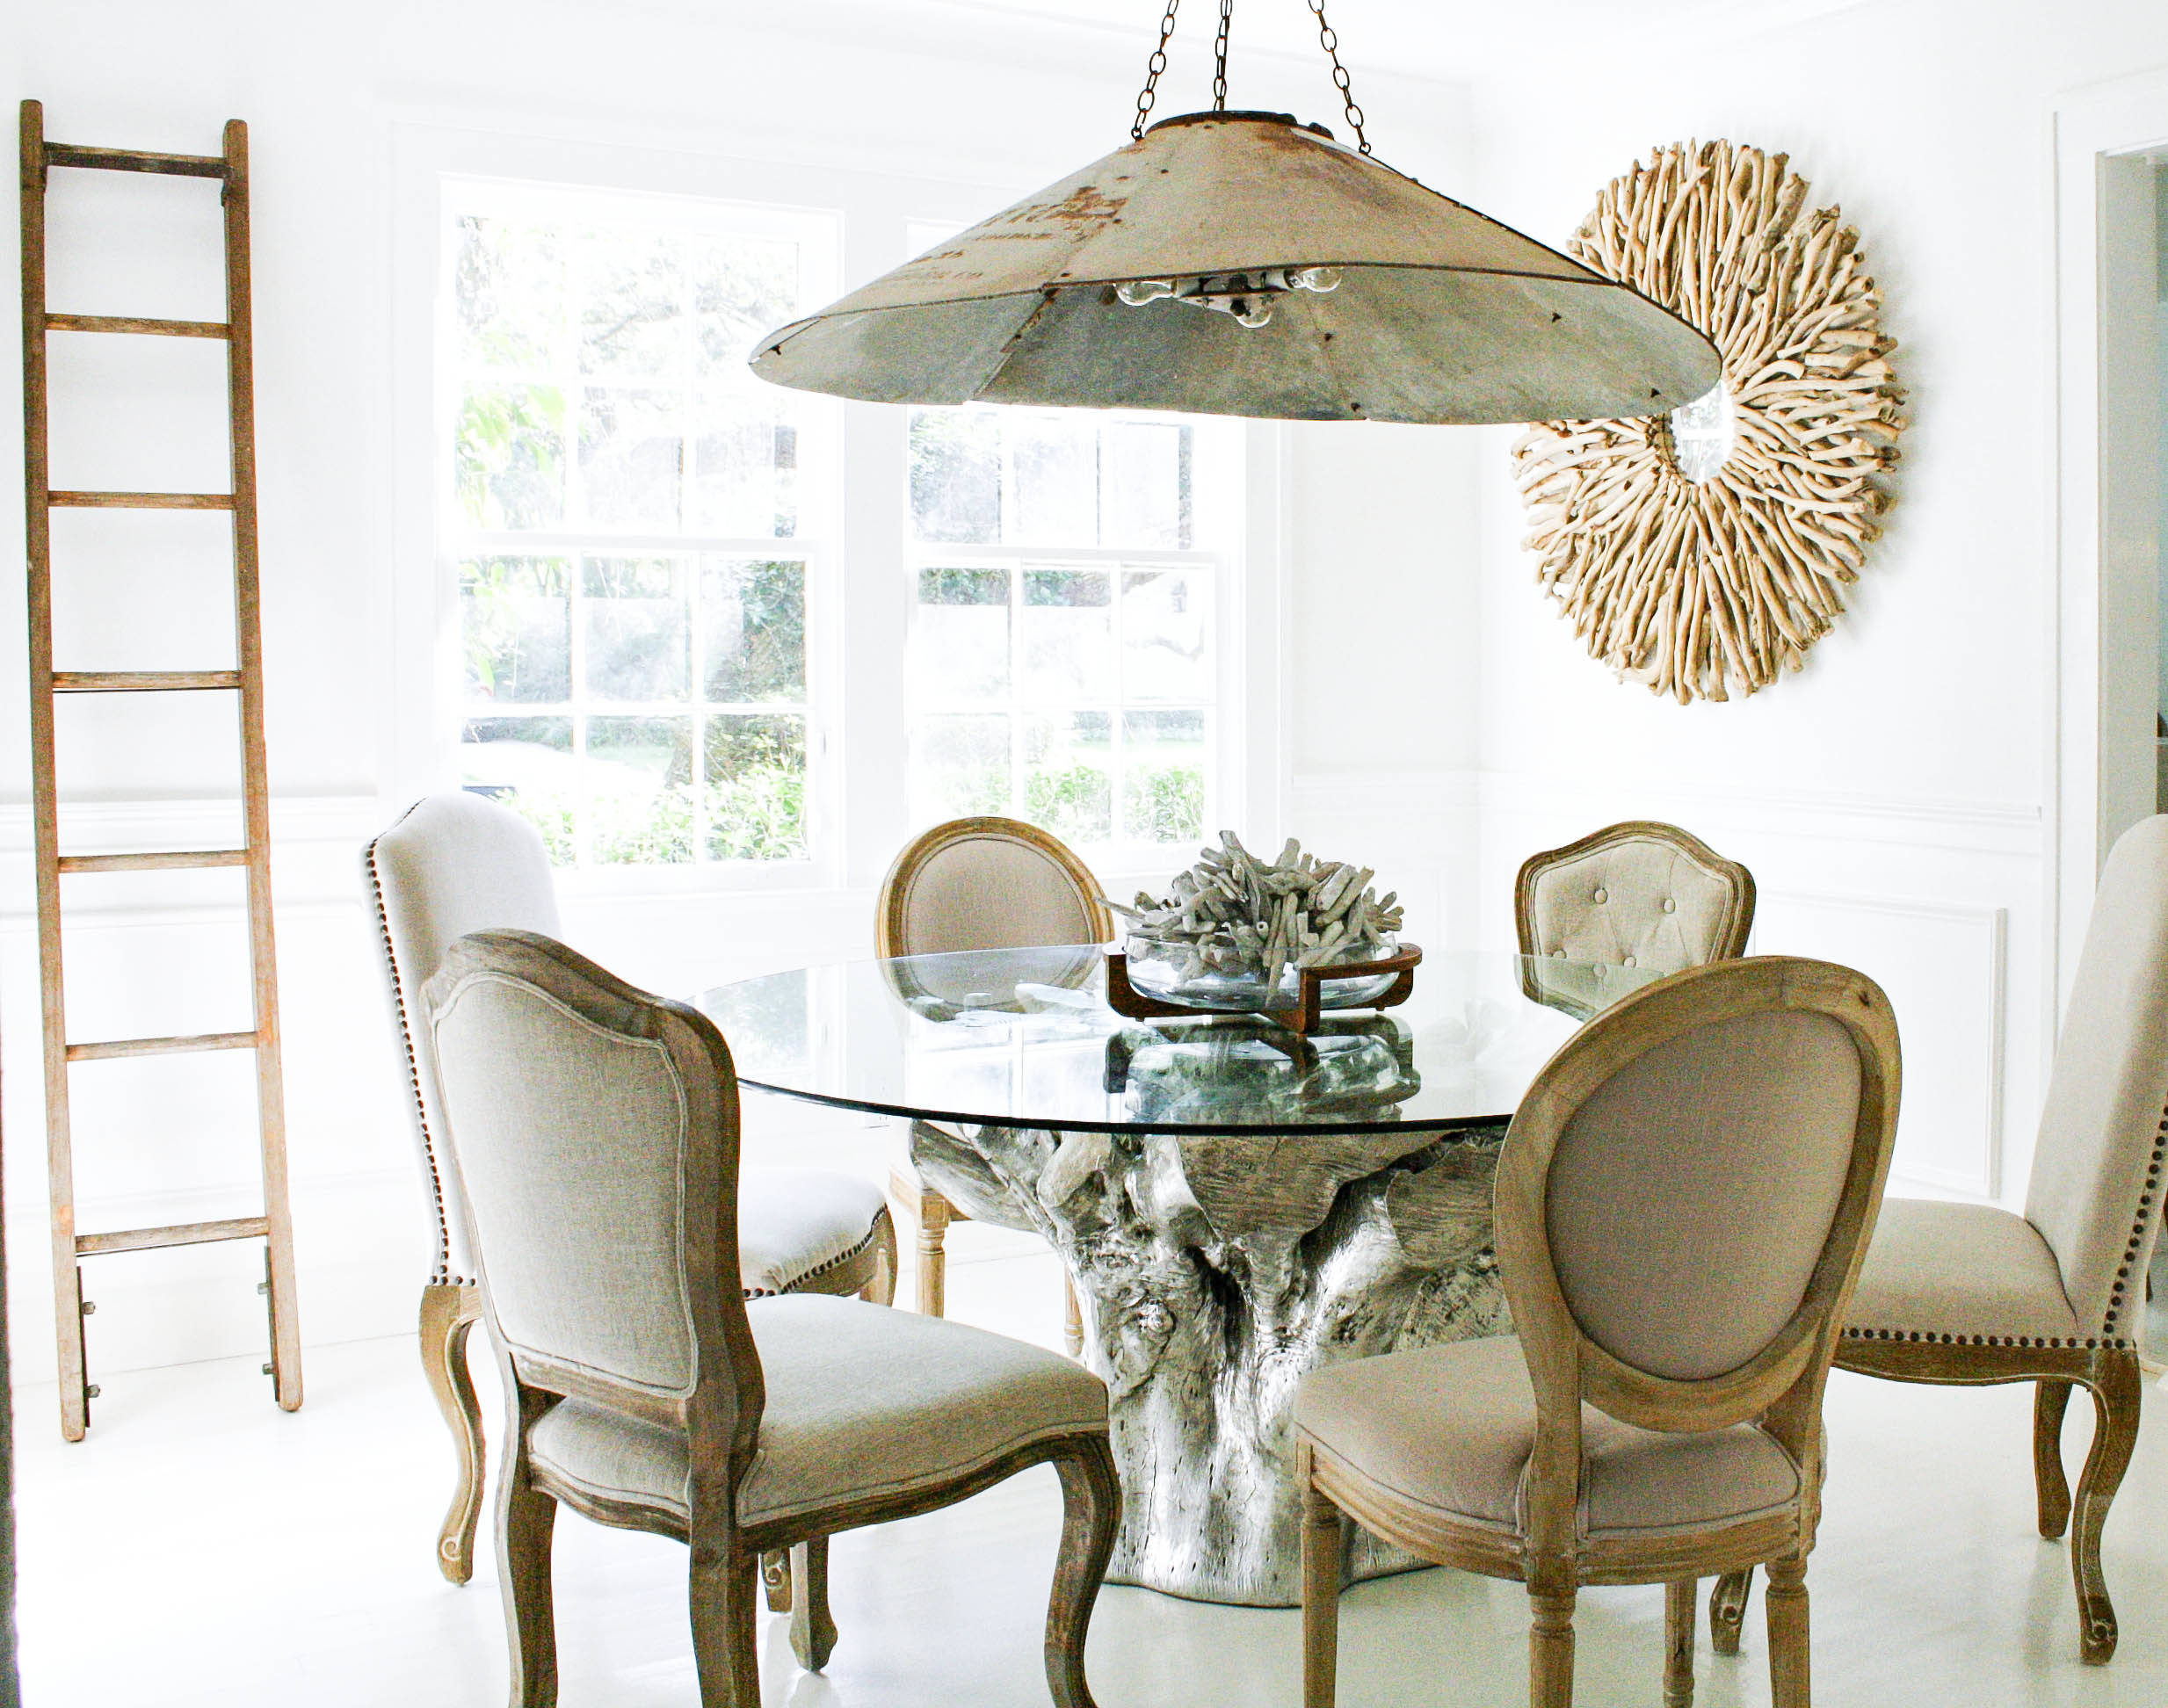 Tampa Cottage Eclectic Dining Room, Houzz Round Dining Room Table